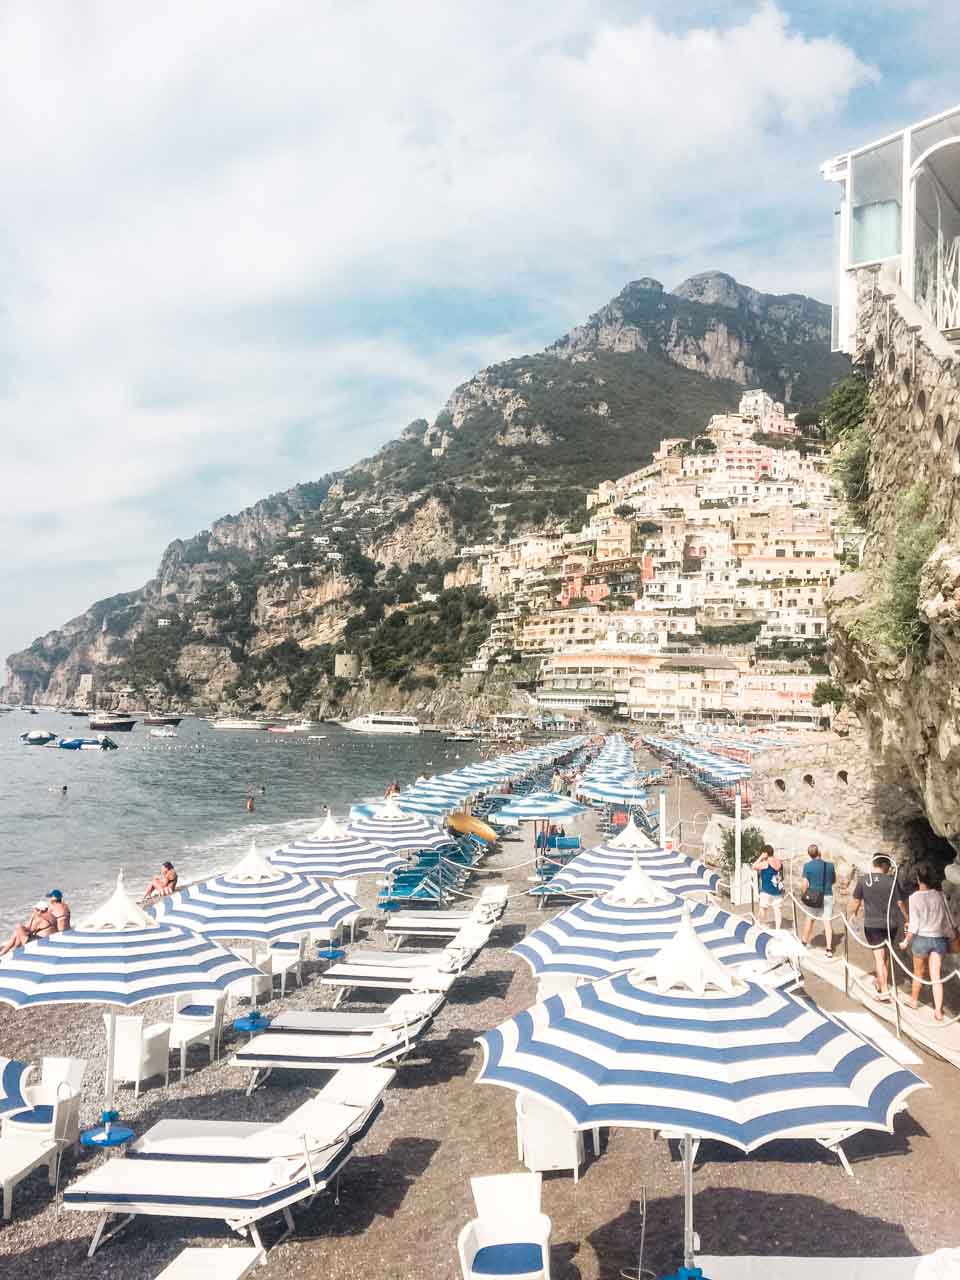 Rows of colourful striped umbrellas on Spiaggia Grande in Positano, Italy seen from above